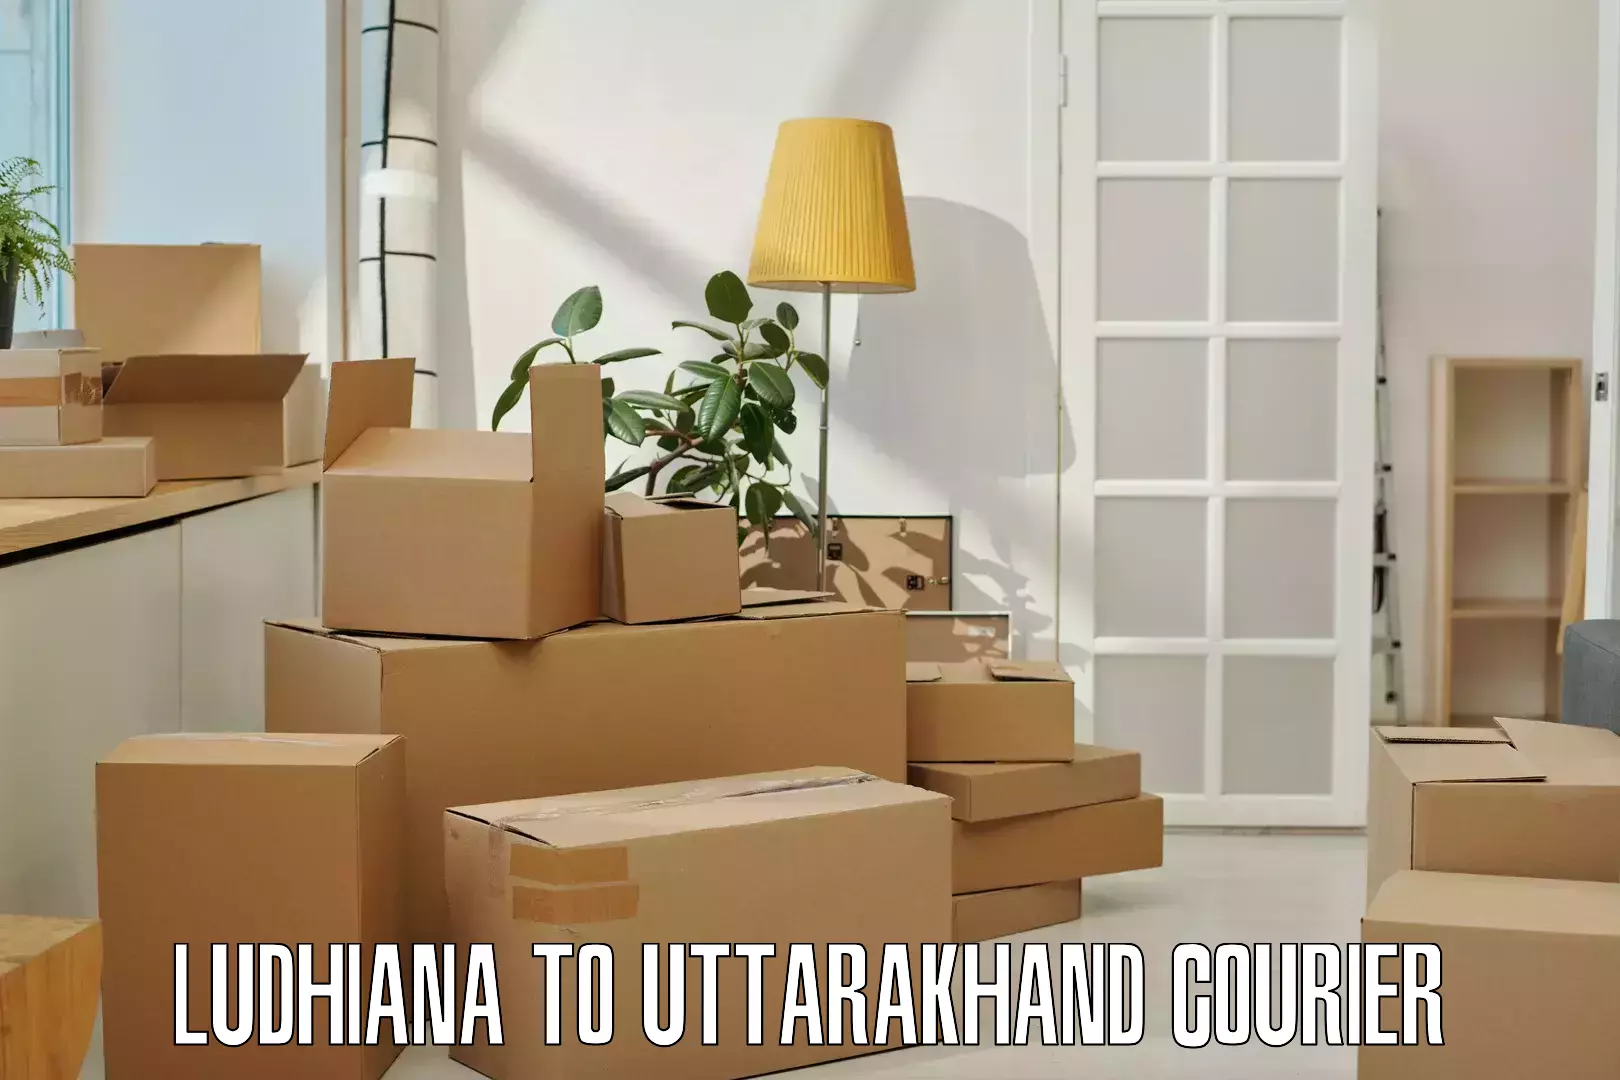 Courier service efficiency in Ludhiana to Uttarakhand